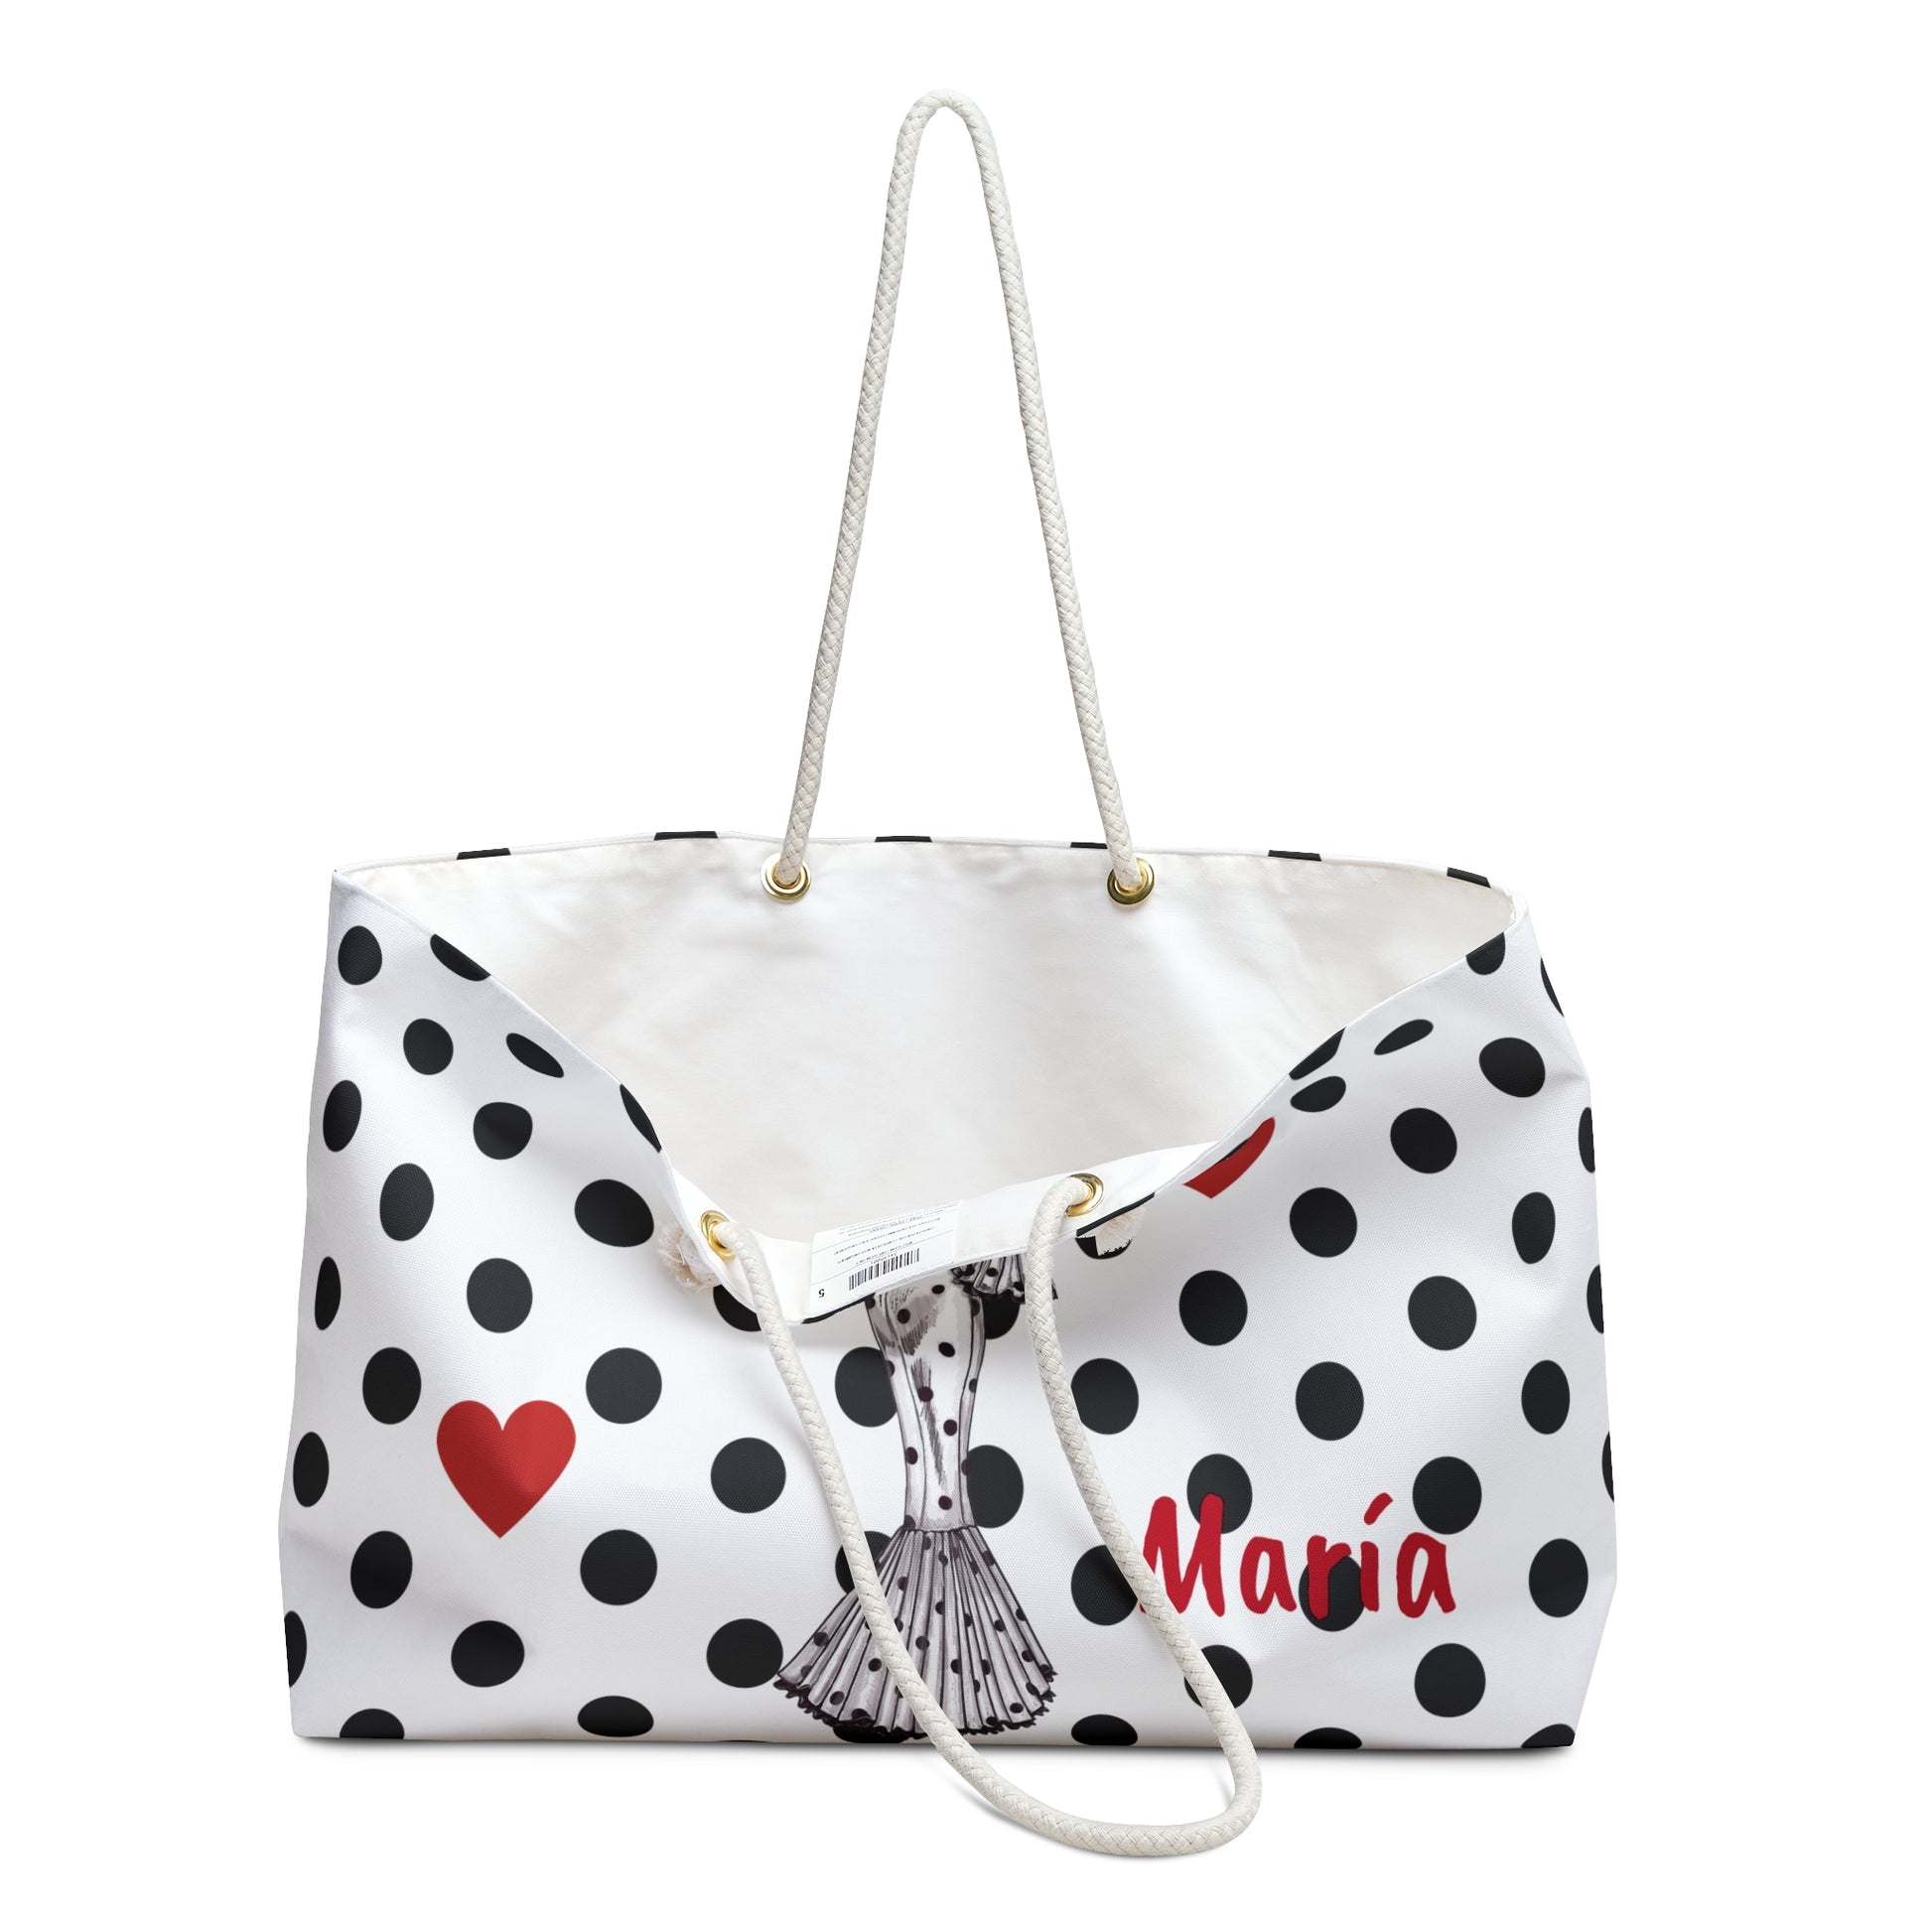 a white polka dot bag with a red heart on it